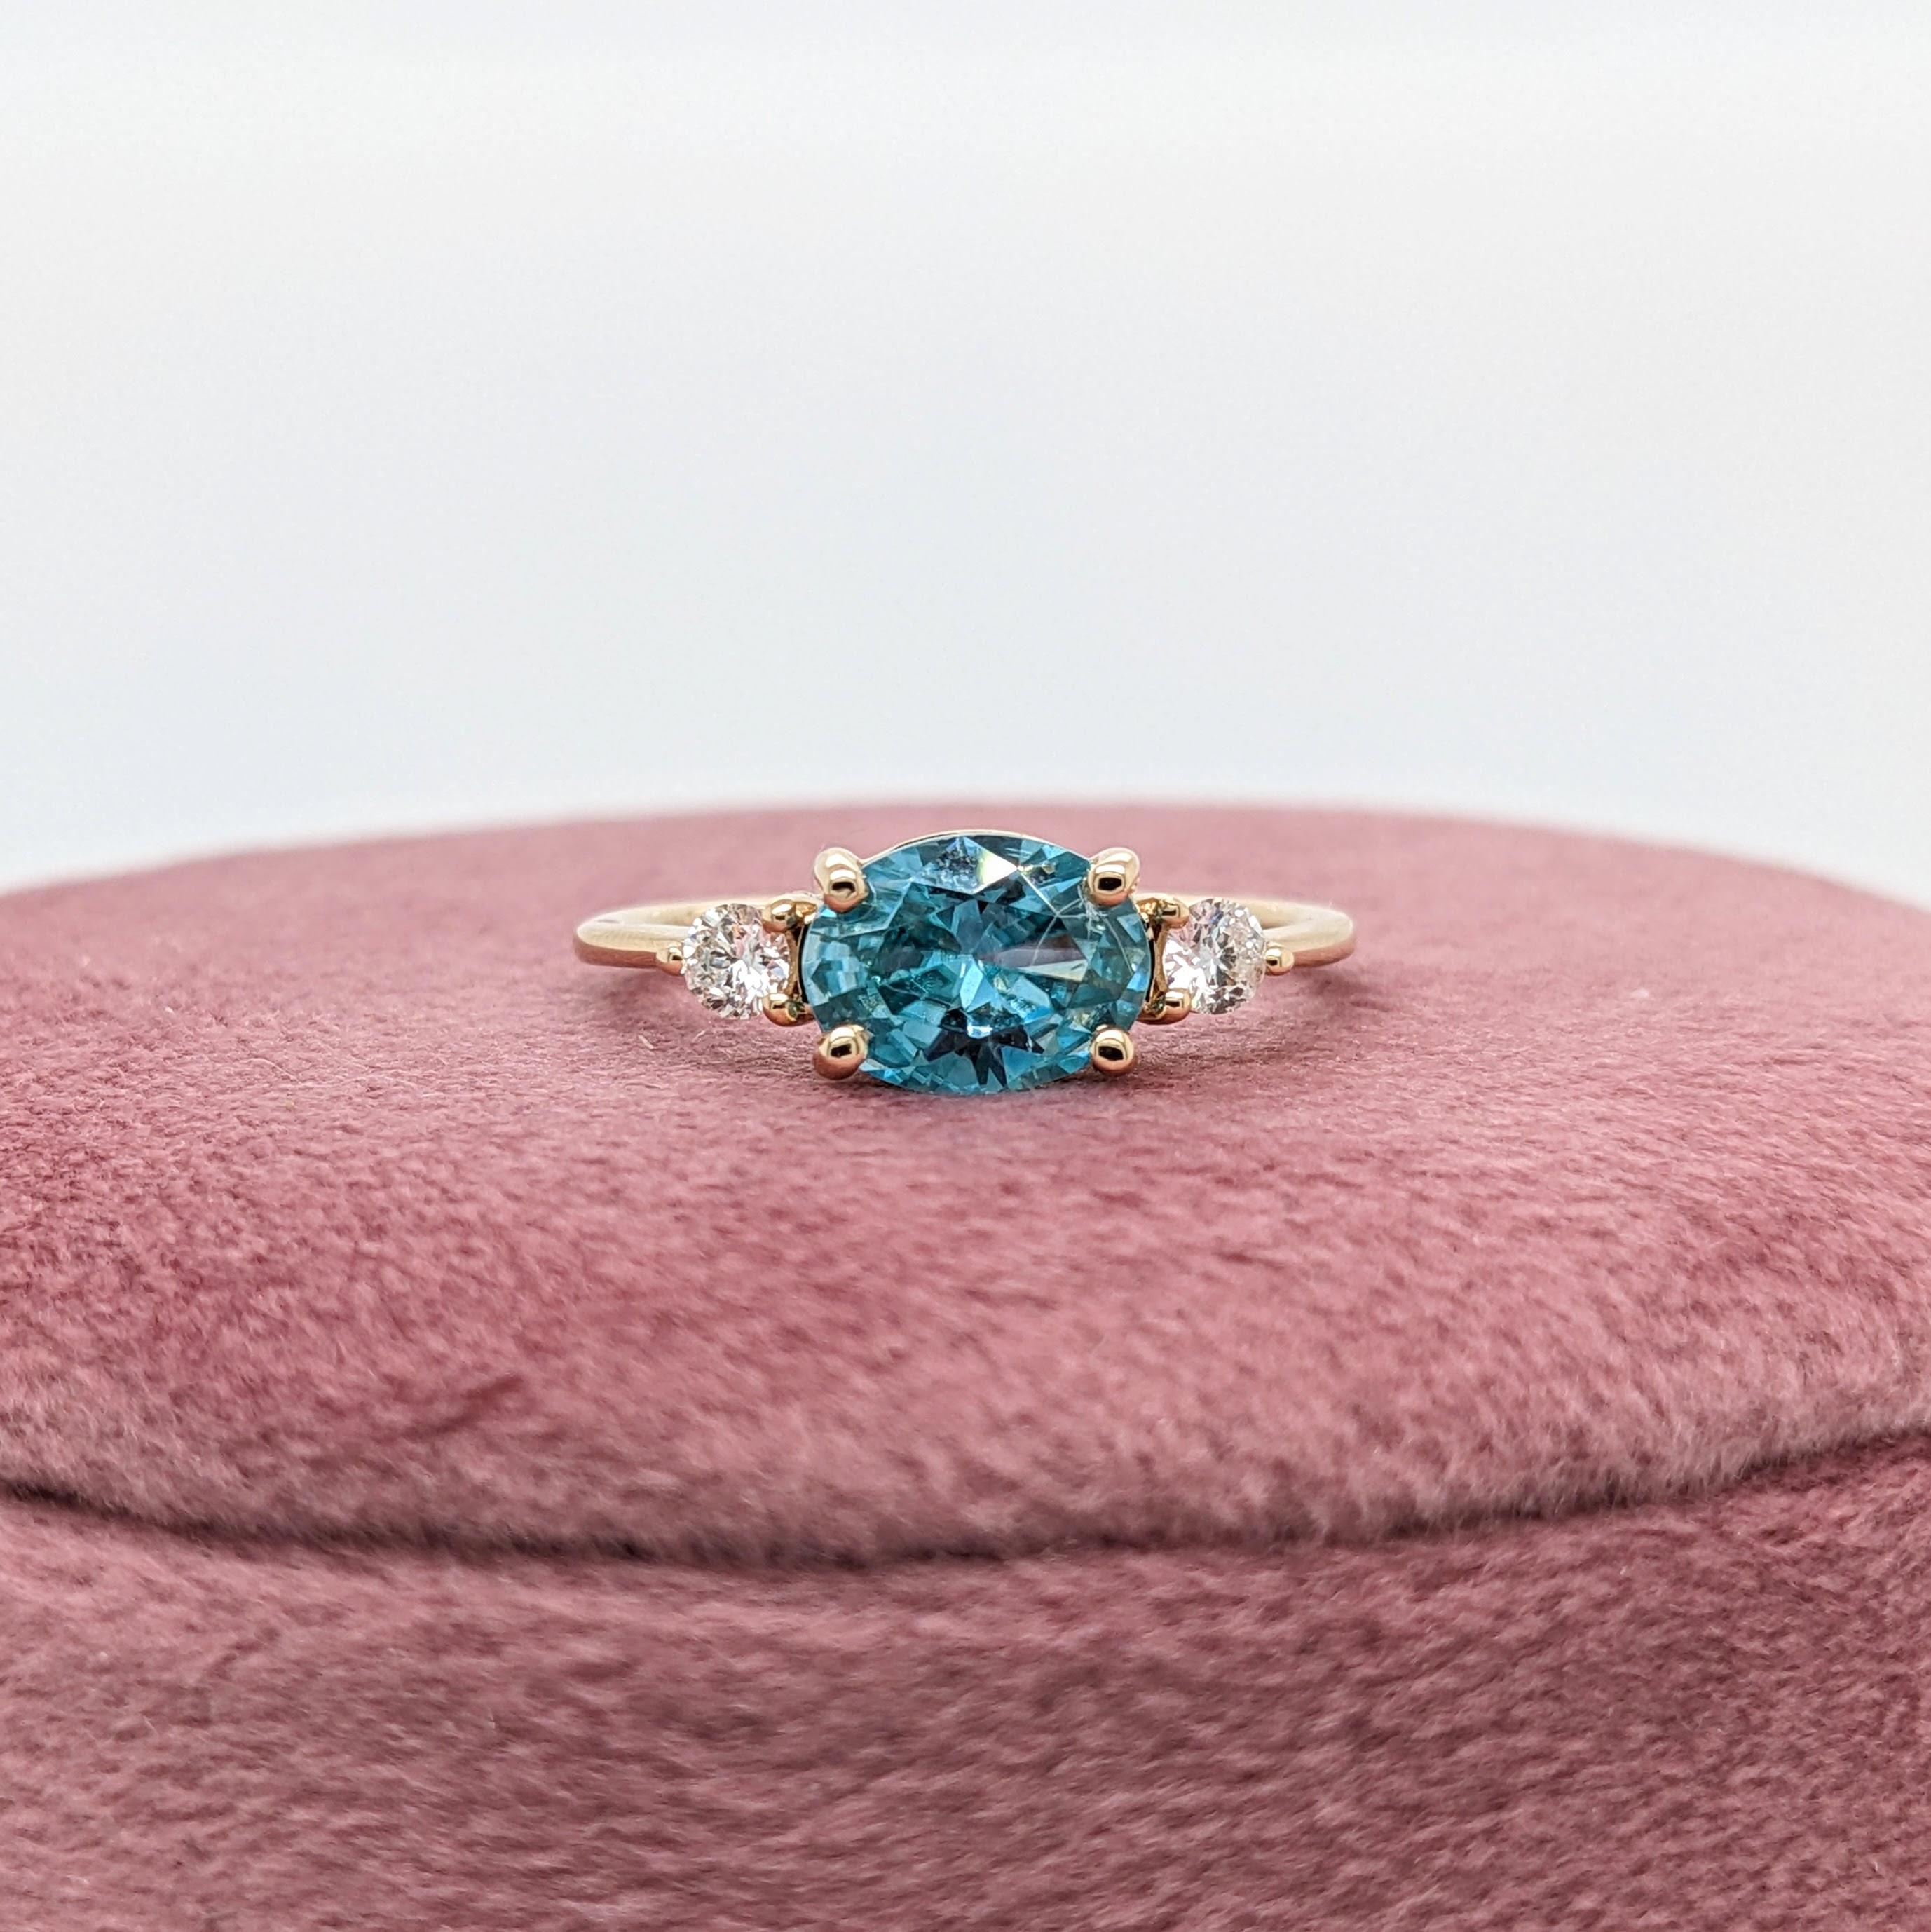 This beautiful ring features a sparkling blue zircon in 14k yellow gold and two diamond accents. A dainty ring design perfect for an eye catching engagement or anniversary. This ring also makes a beautiful birthstone ring for your loved ones.

The